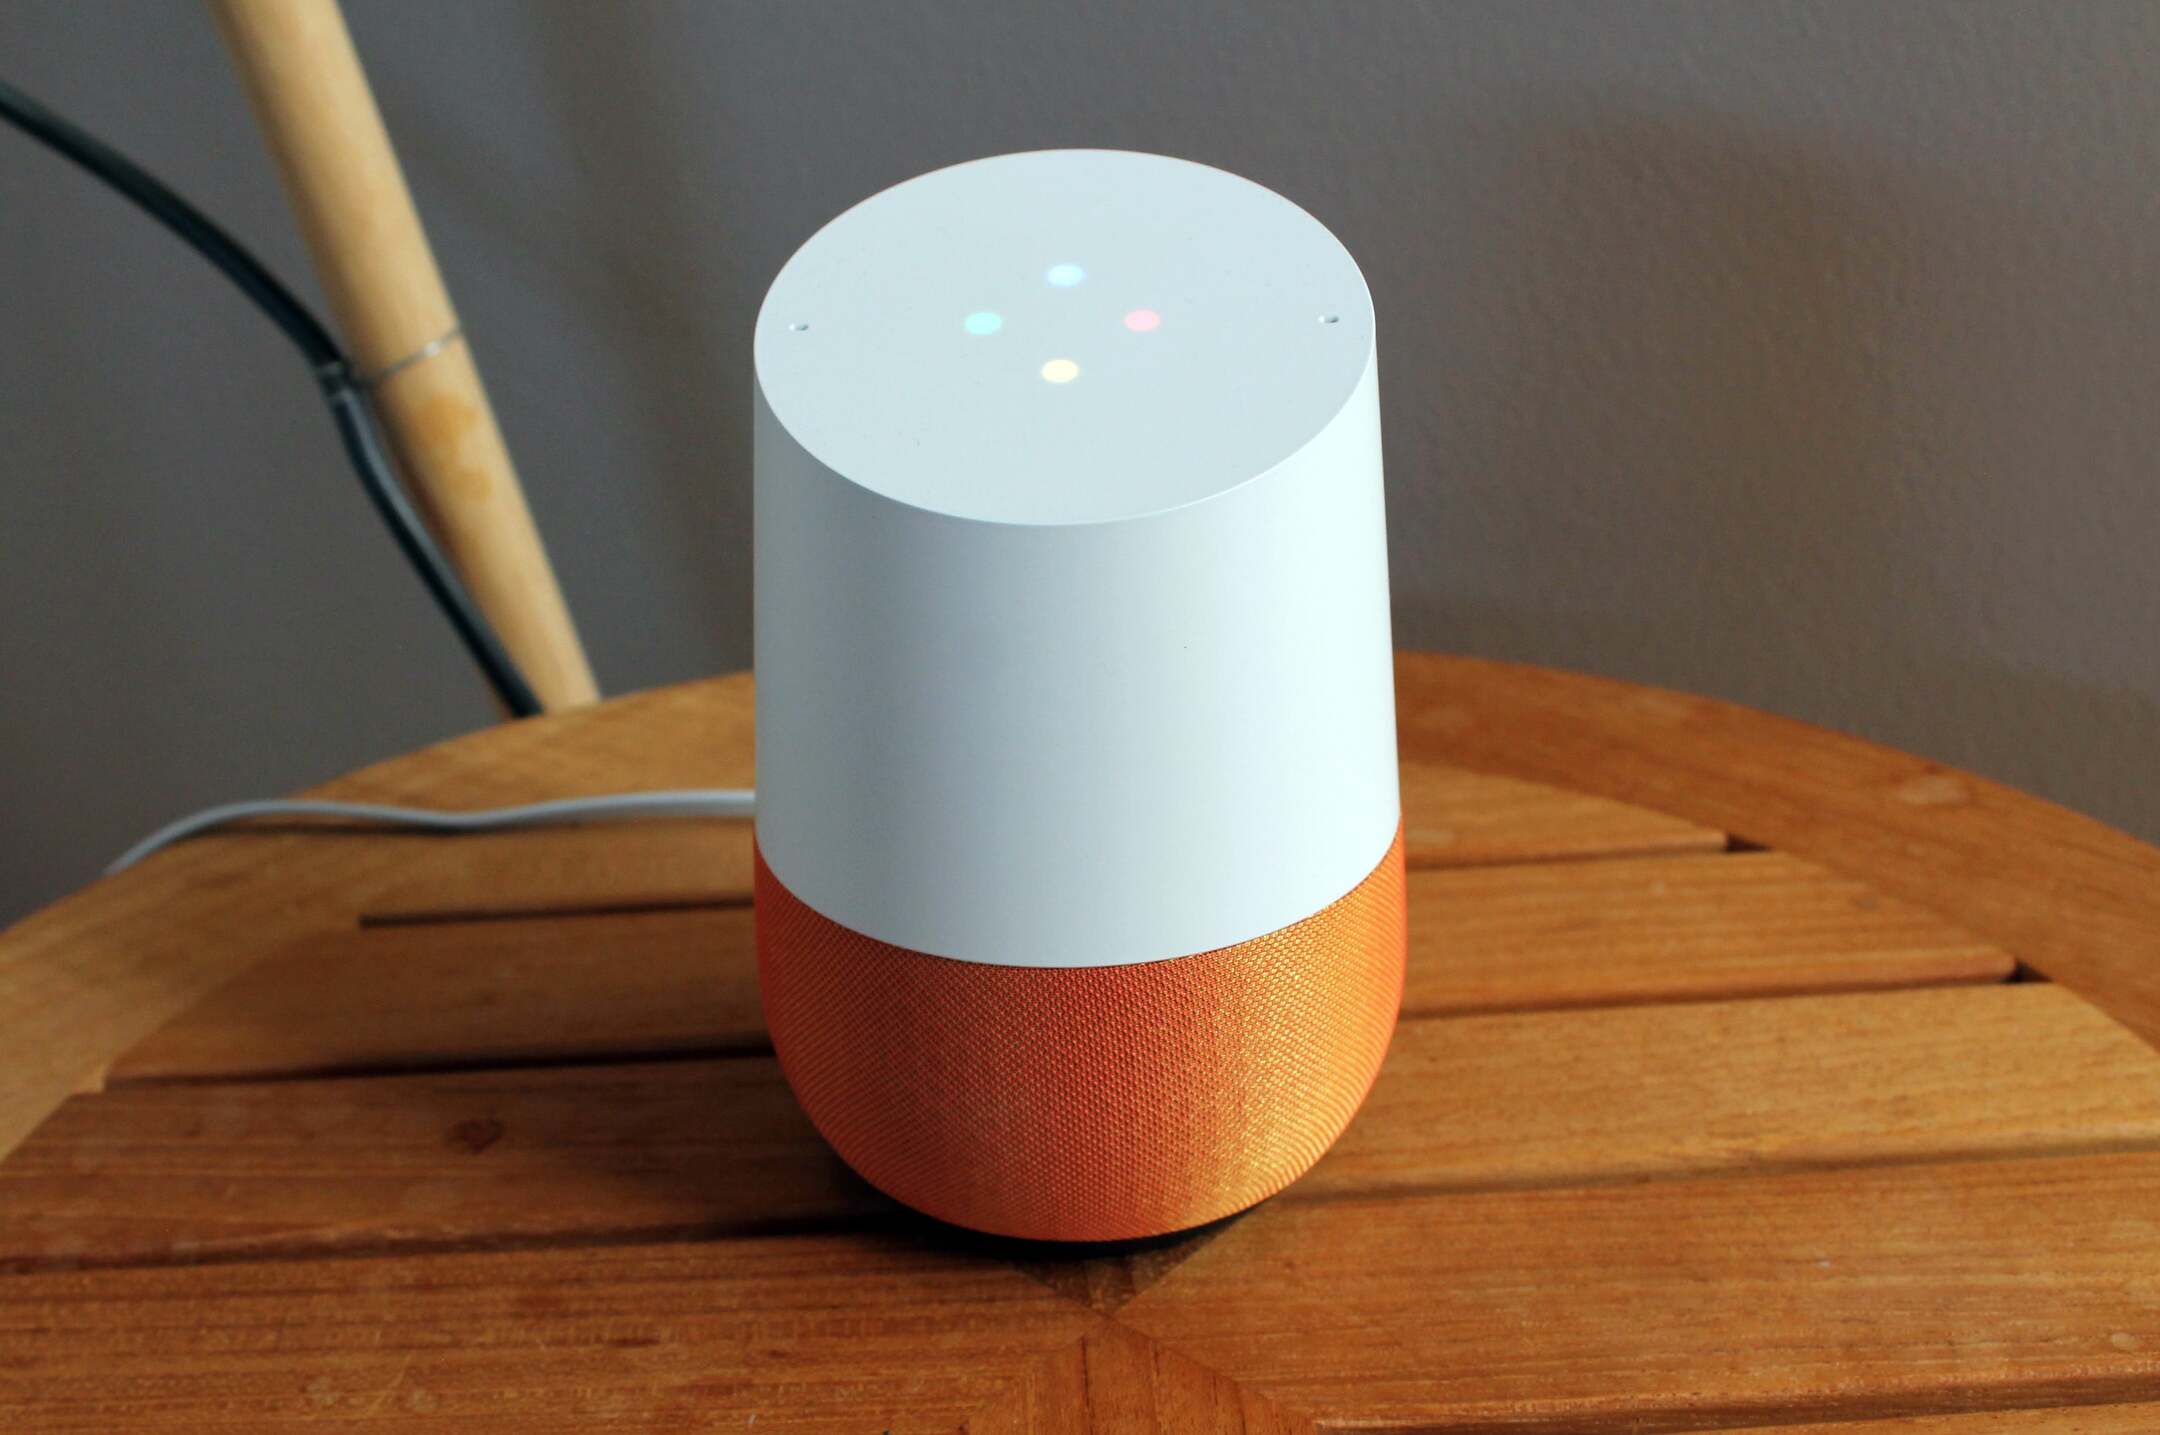 How To Add IFTTT To Google Home